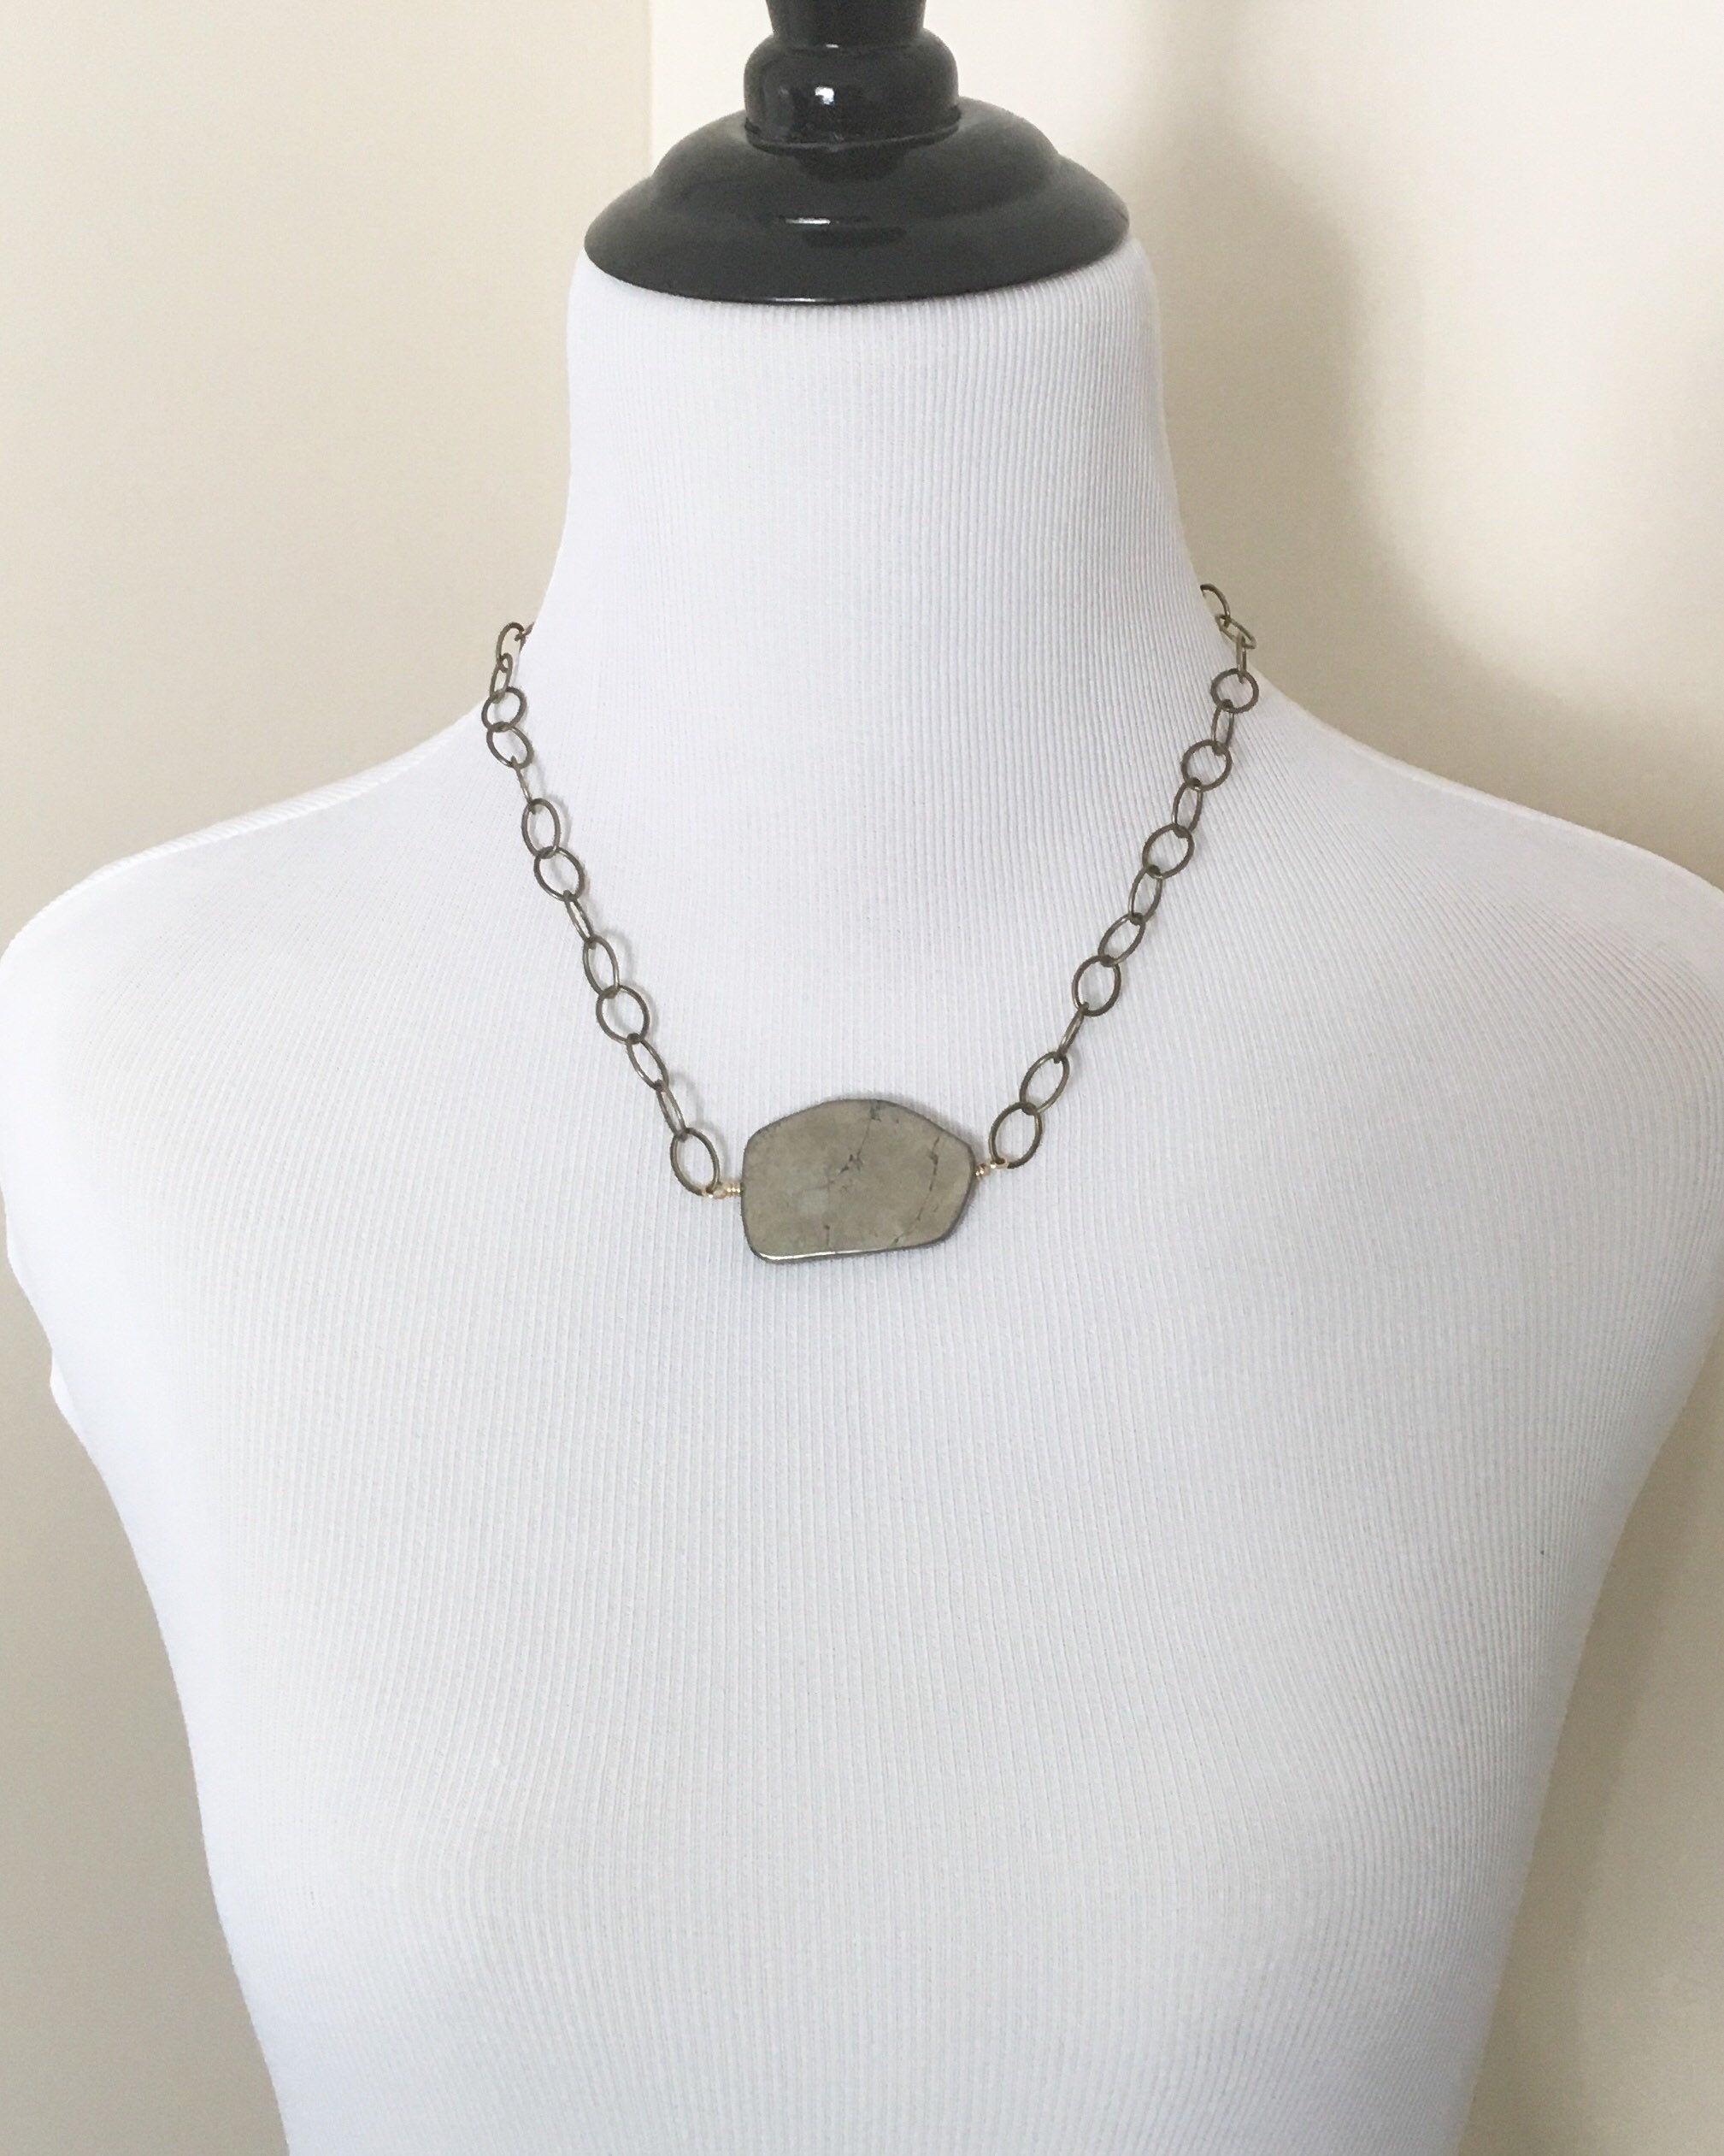 Mannequin wearing Sliced pyrite stone hand wired onto yellow gold antique brass plated chain necklace.